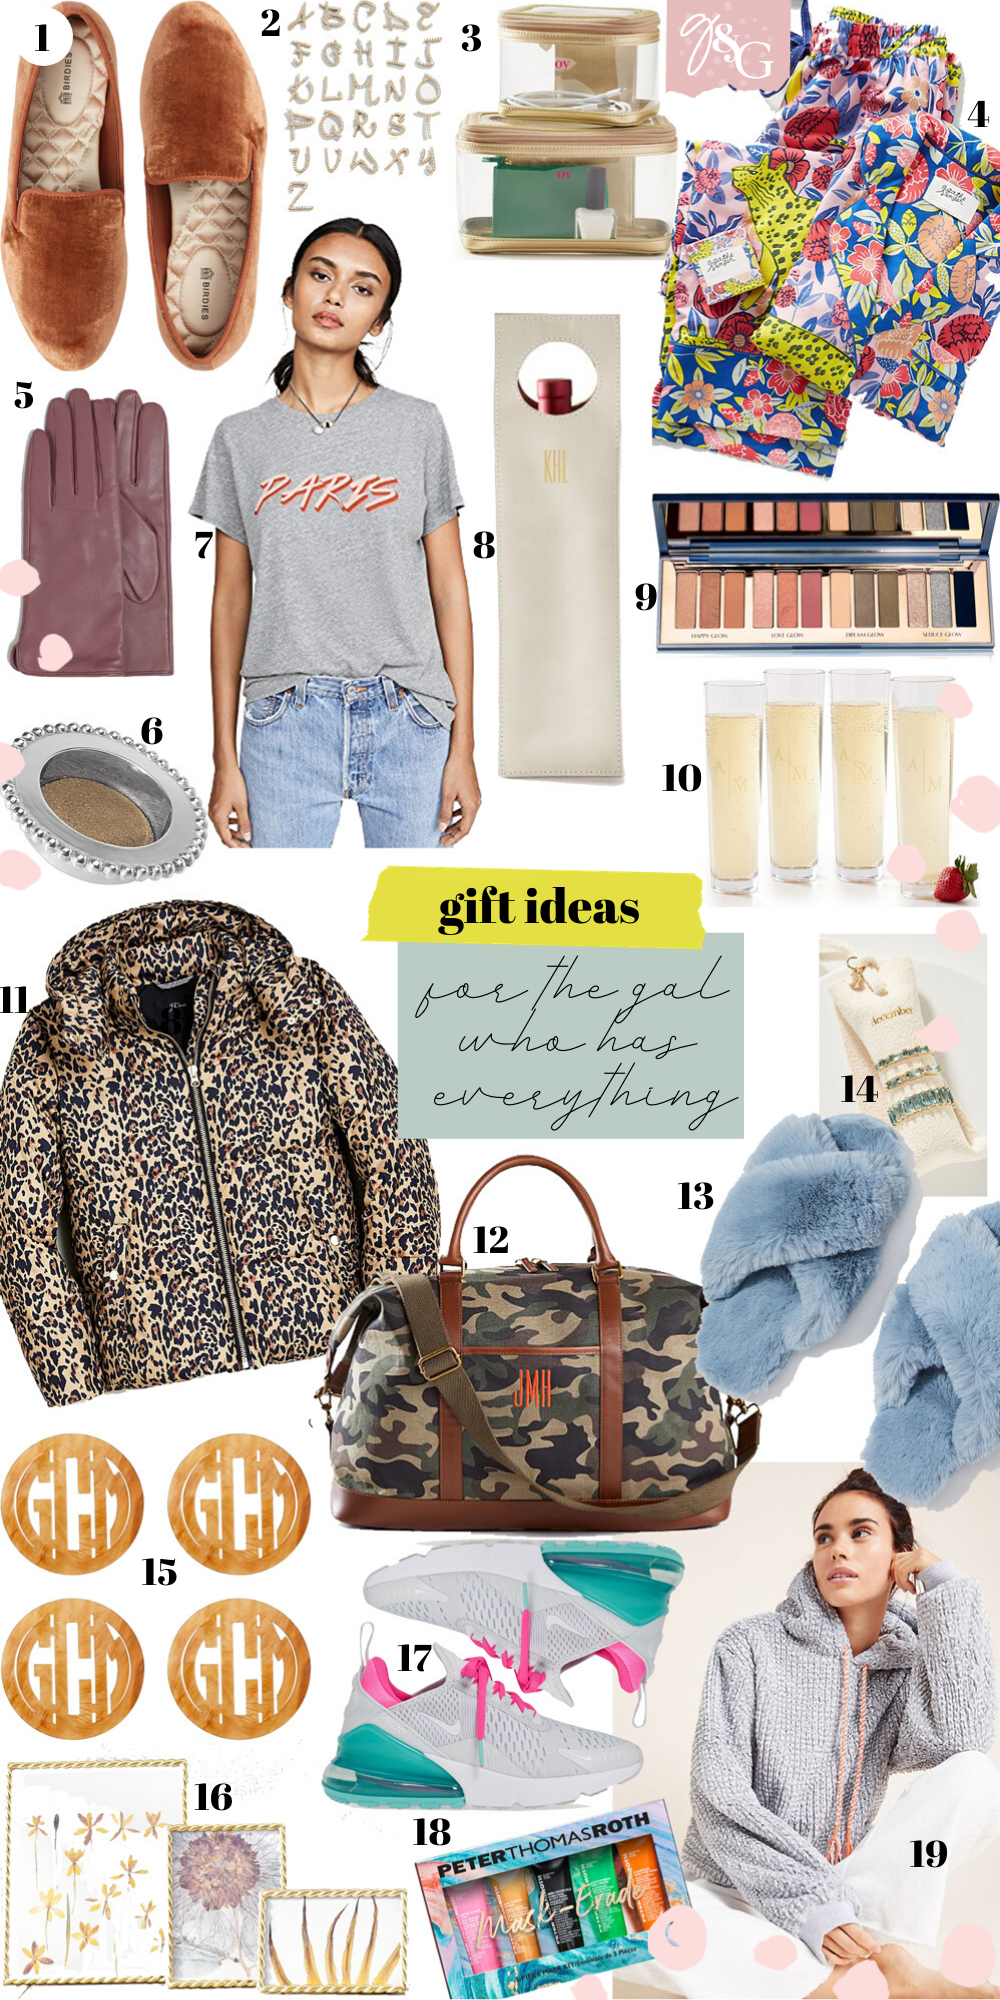 gift guide for the gal who has everything